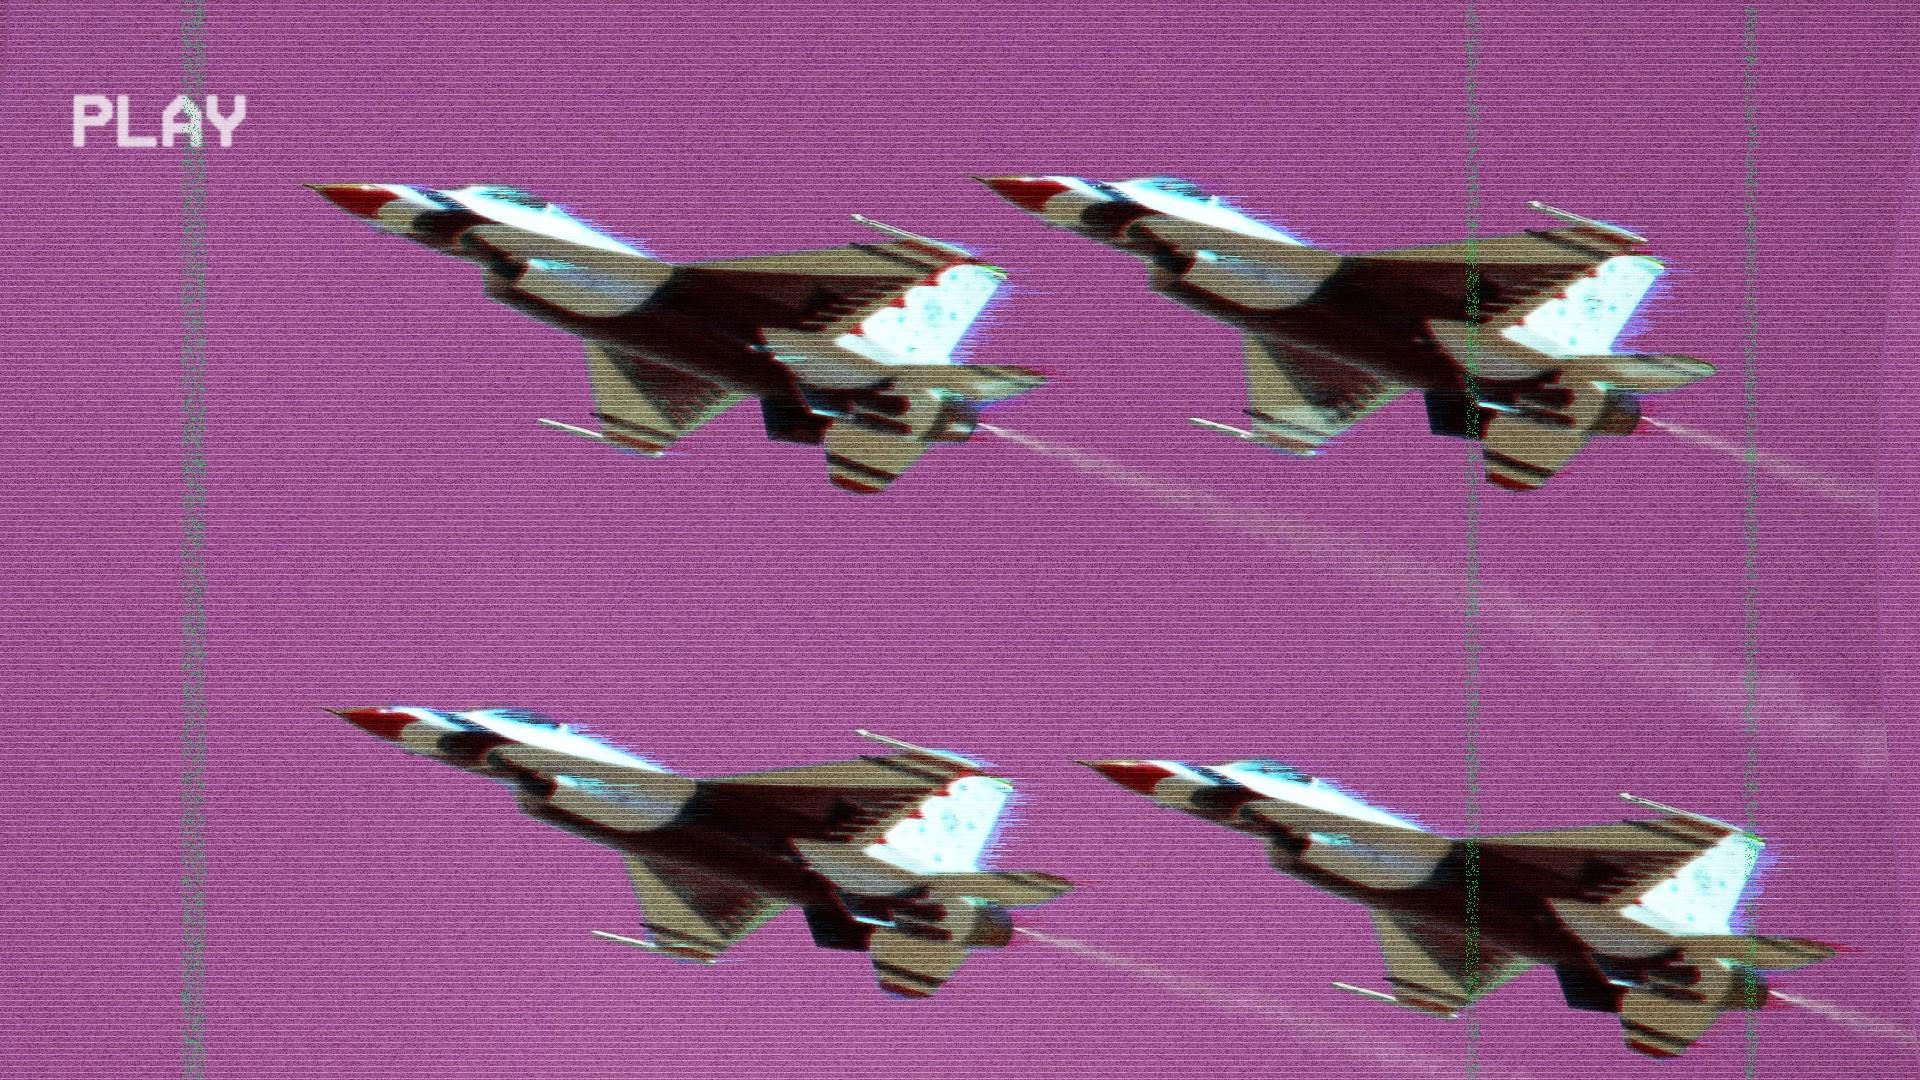 HD wallpaper, Military Vehicle, Vaporwave, Natowave, Vhs, Military Aircraft, Us Air Force, General Dynamics F 16 Fighting Falcon, Vehicle, Glitch Art, Aircraft, Multirole Fighter, Thunderbirds, Formation, Aerobatic Team